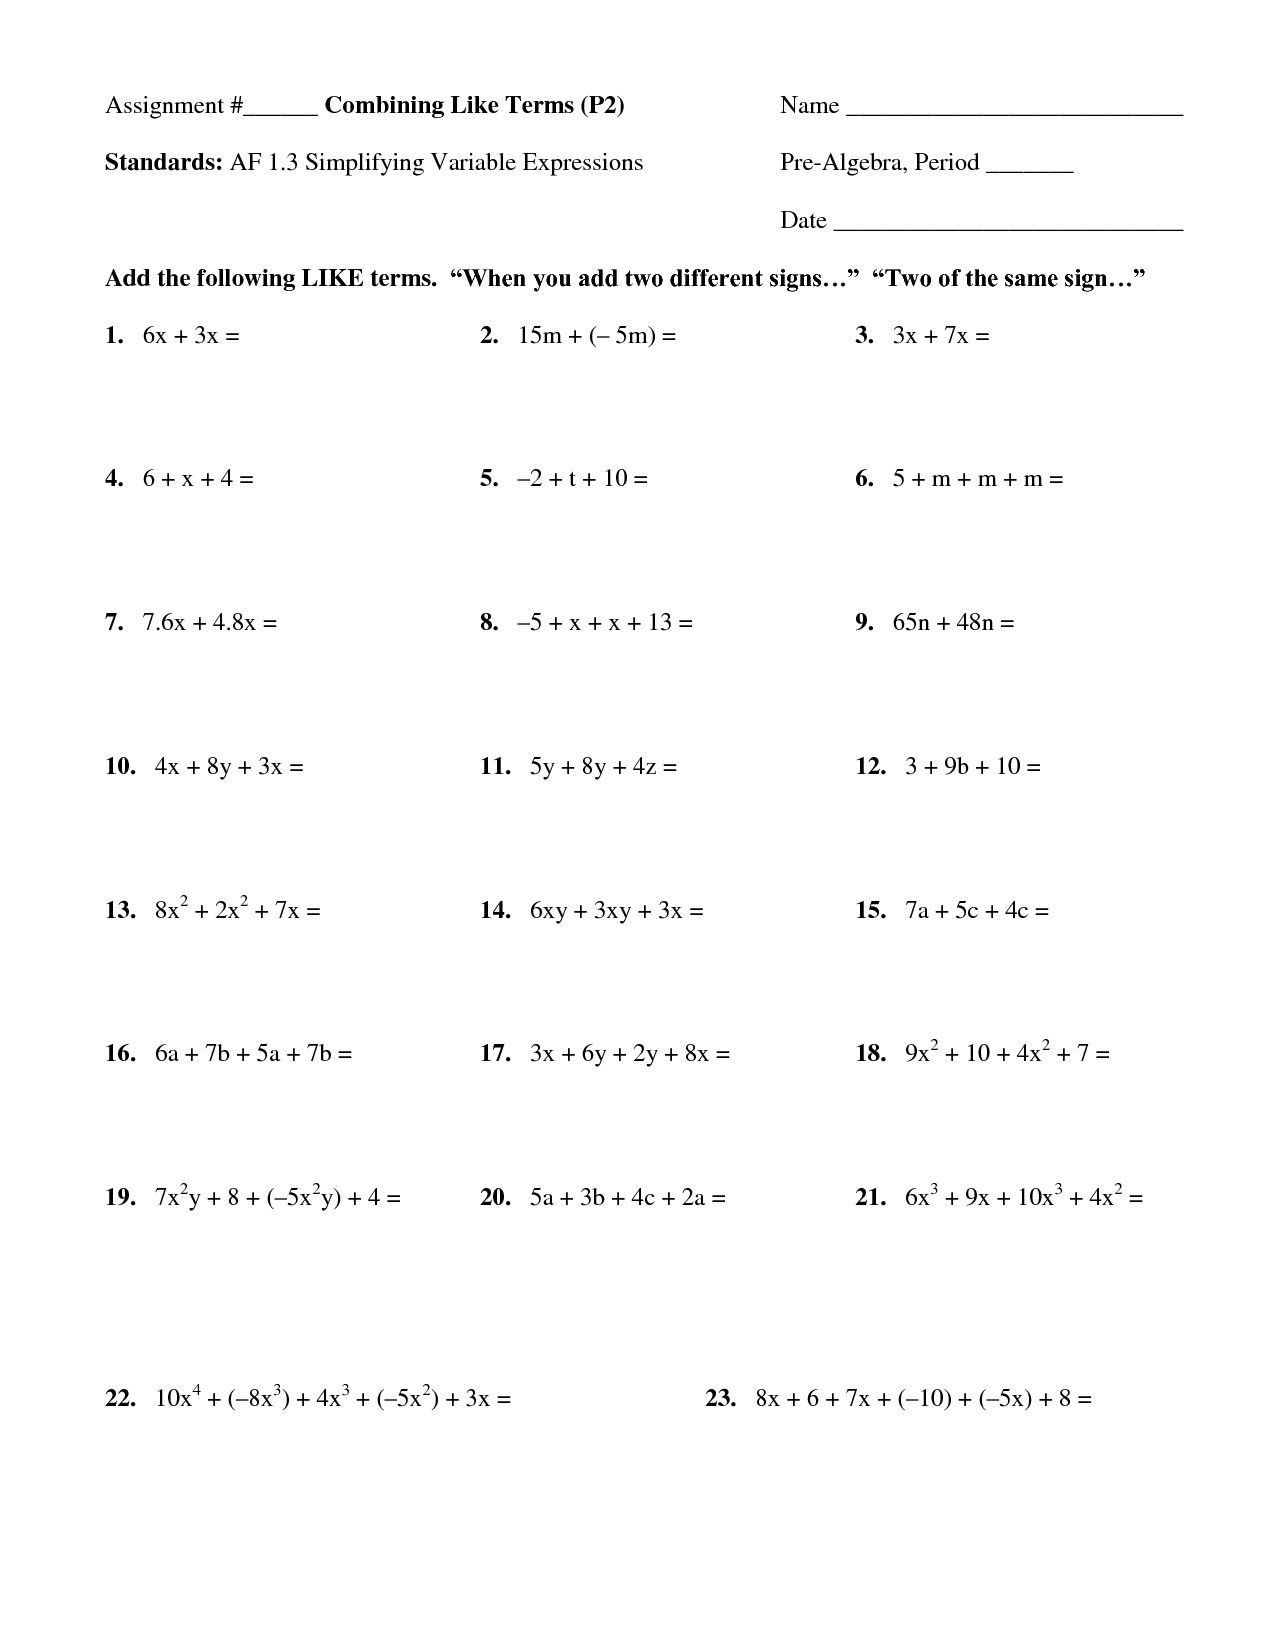 Law Of Sines Worksheet Answers Law Cosines Worksheet Answers